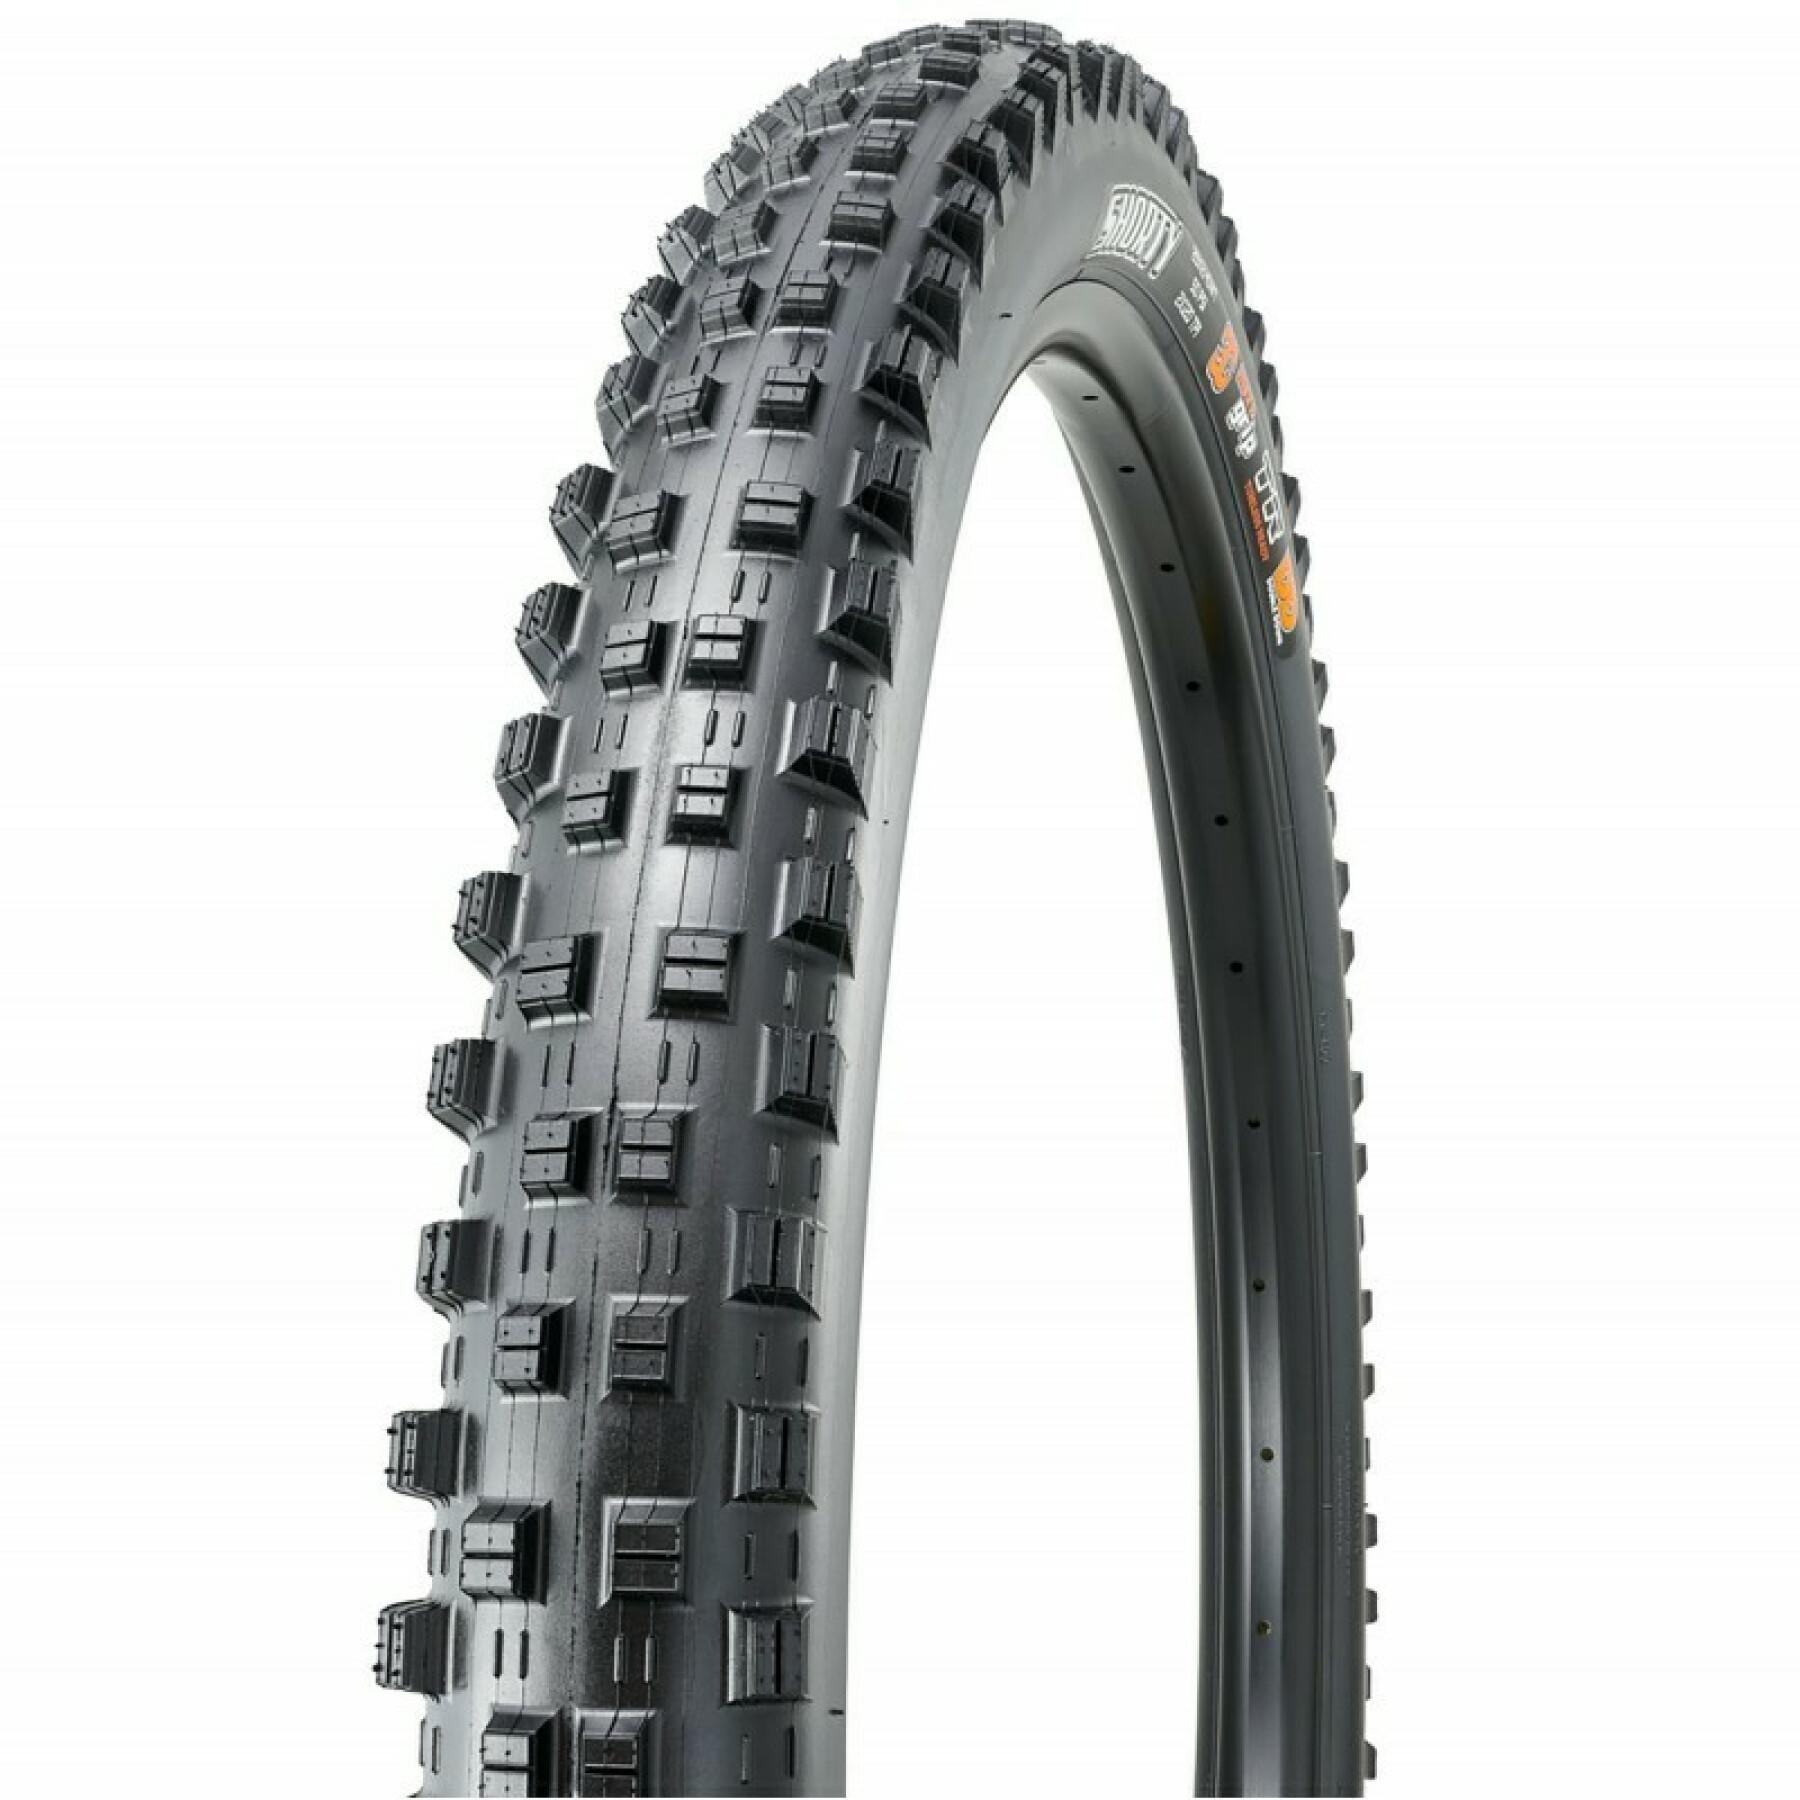 Soft tire Maxxis Shorty 29x2.40wt 3c Grip / Tubeless Ready / Double Down